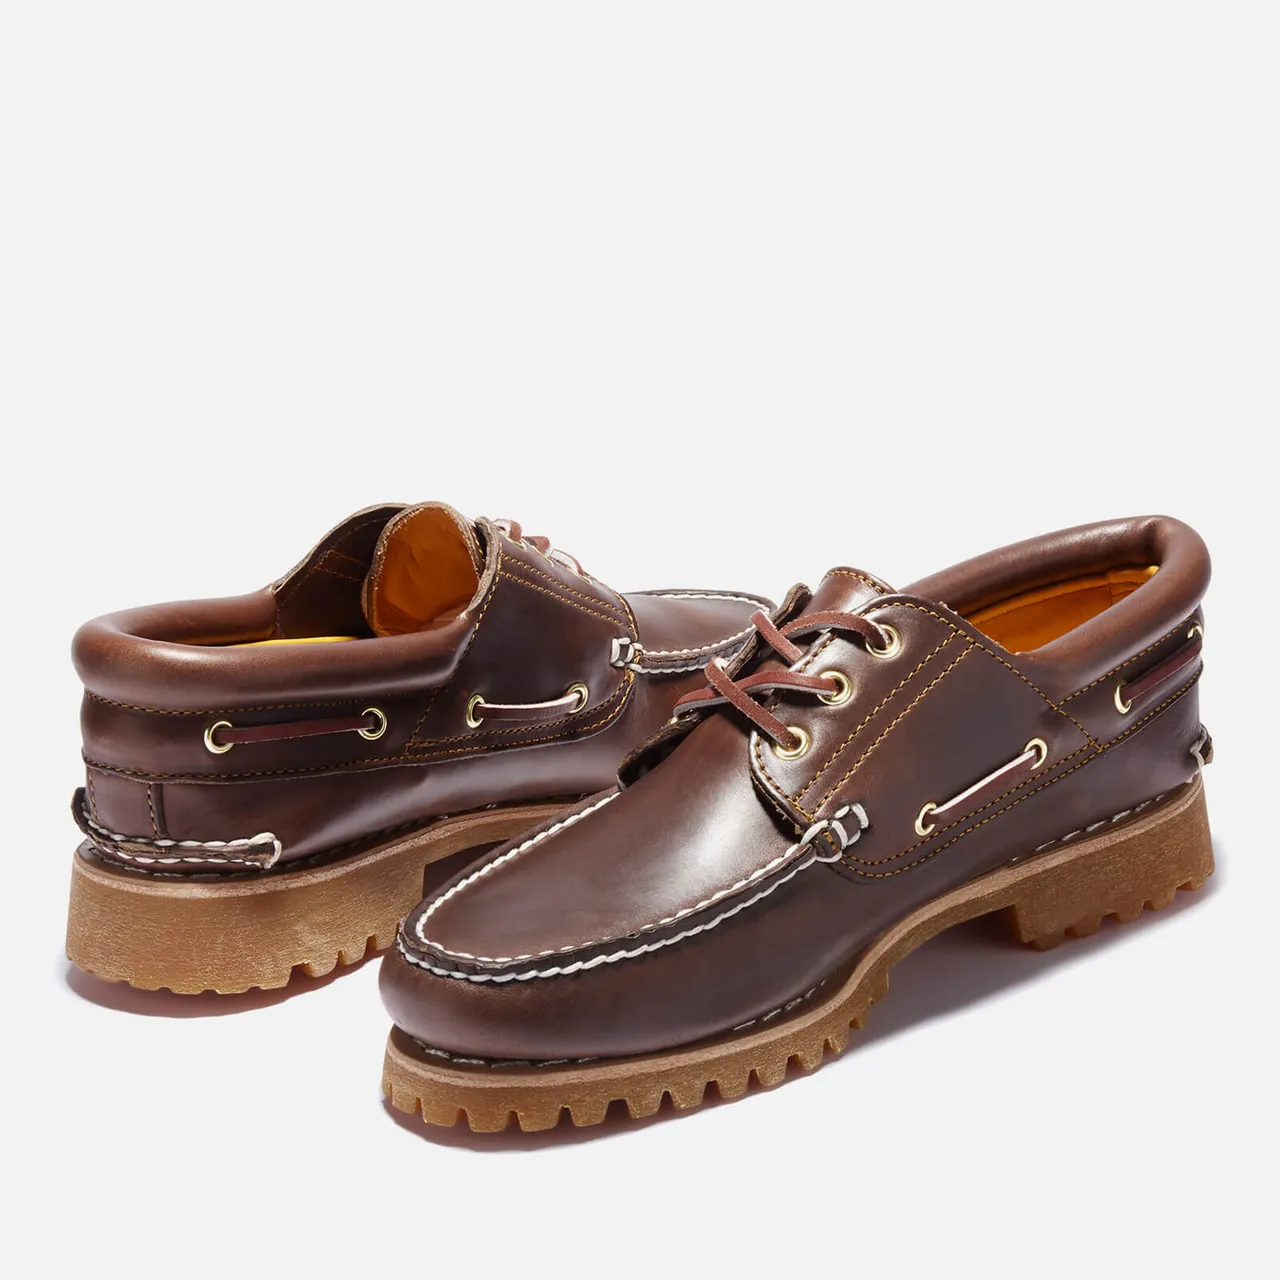 Timberland Men's Authentic Leather Boat Shoes - UK